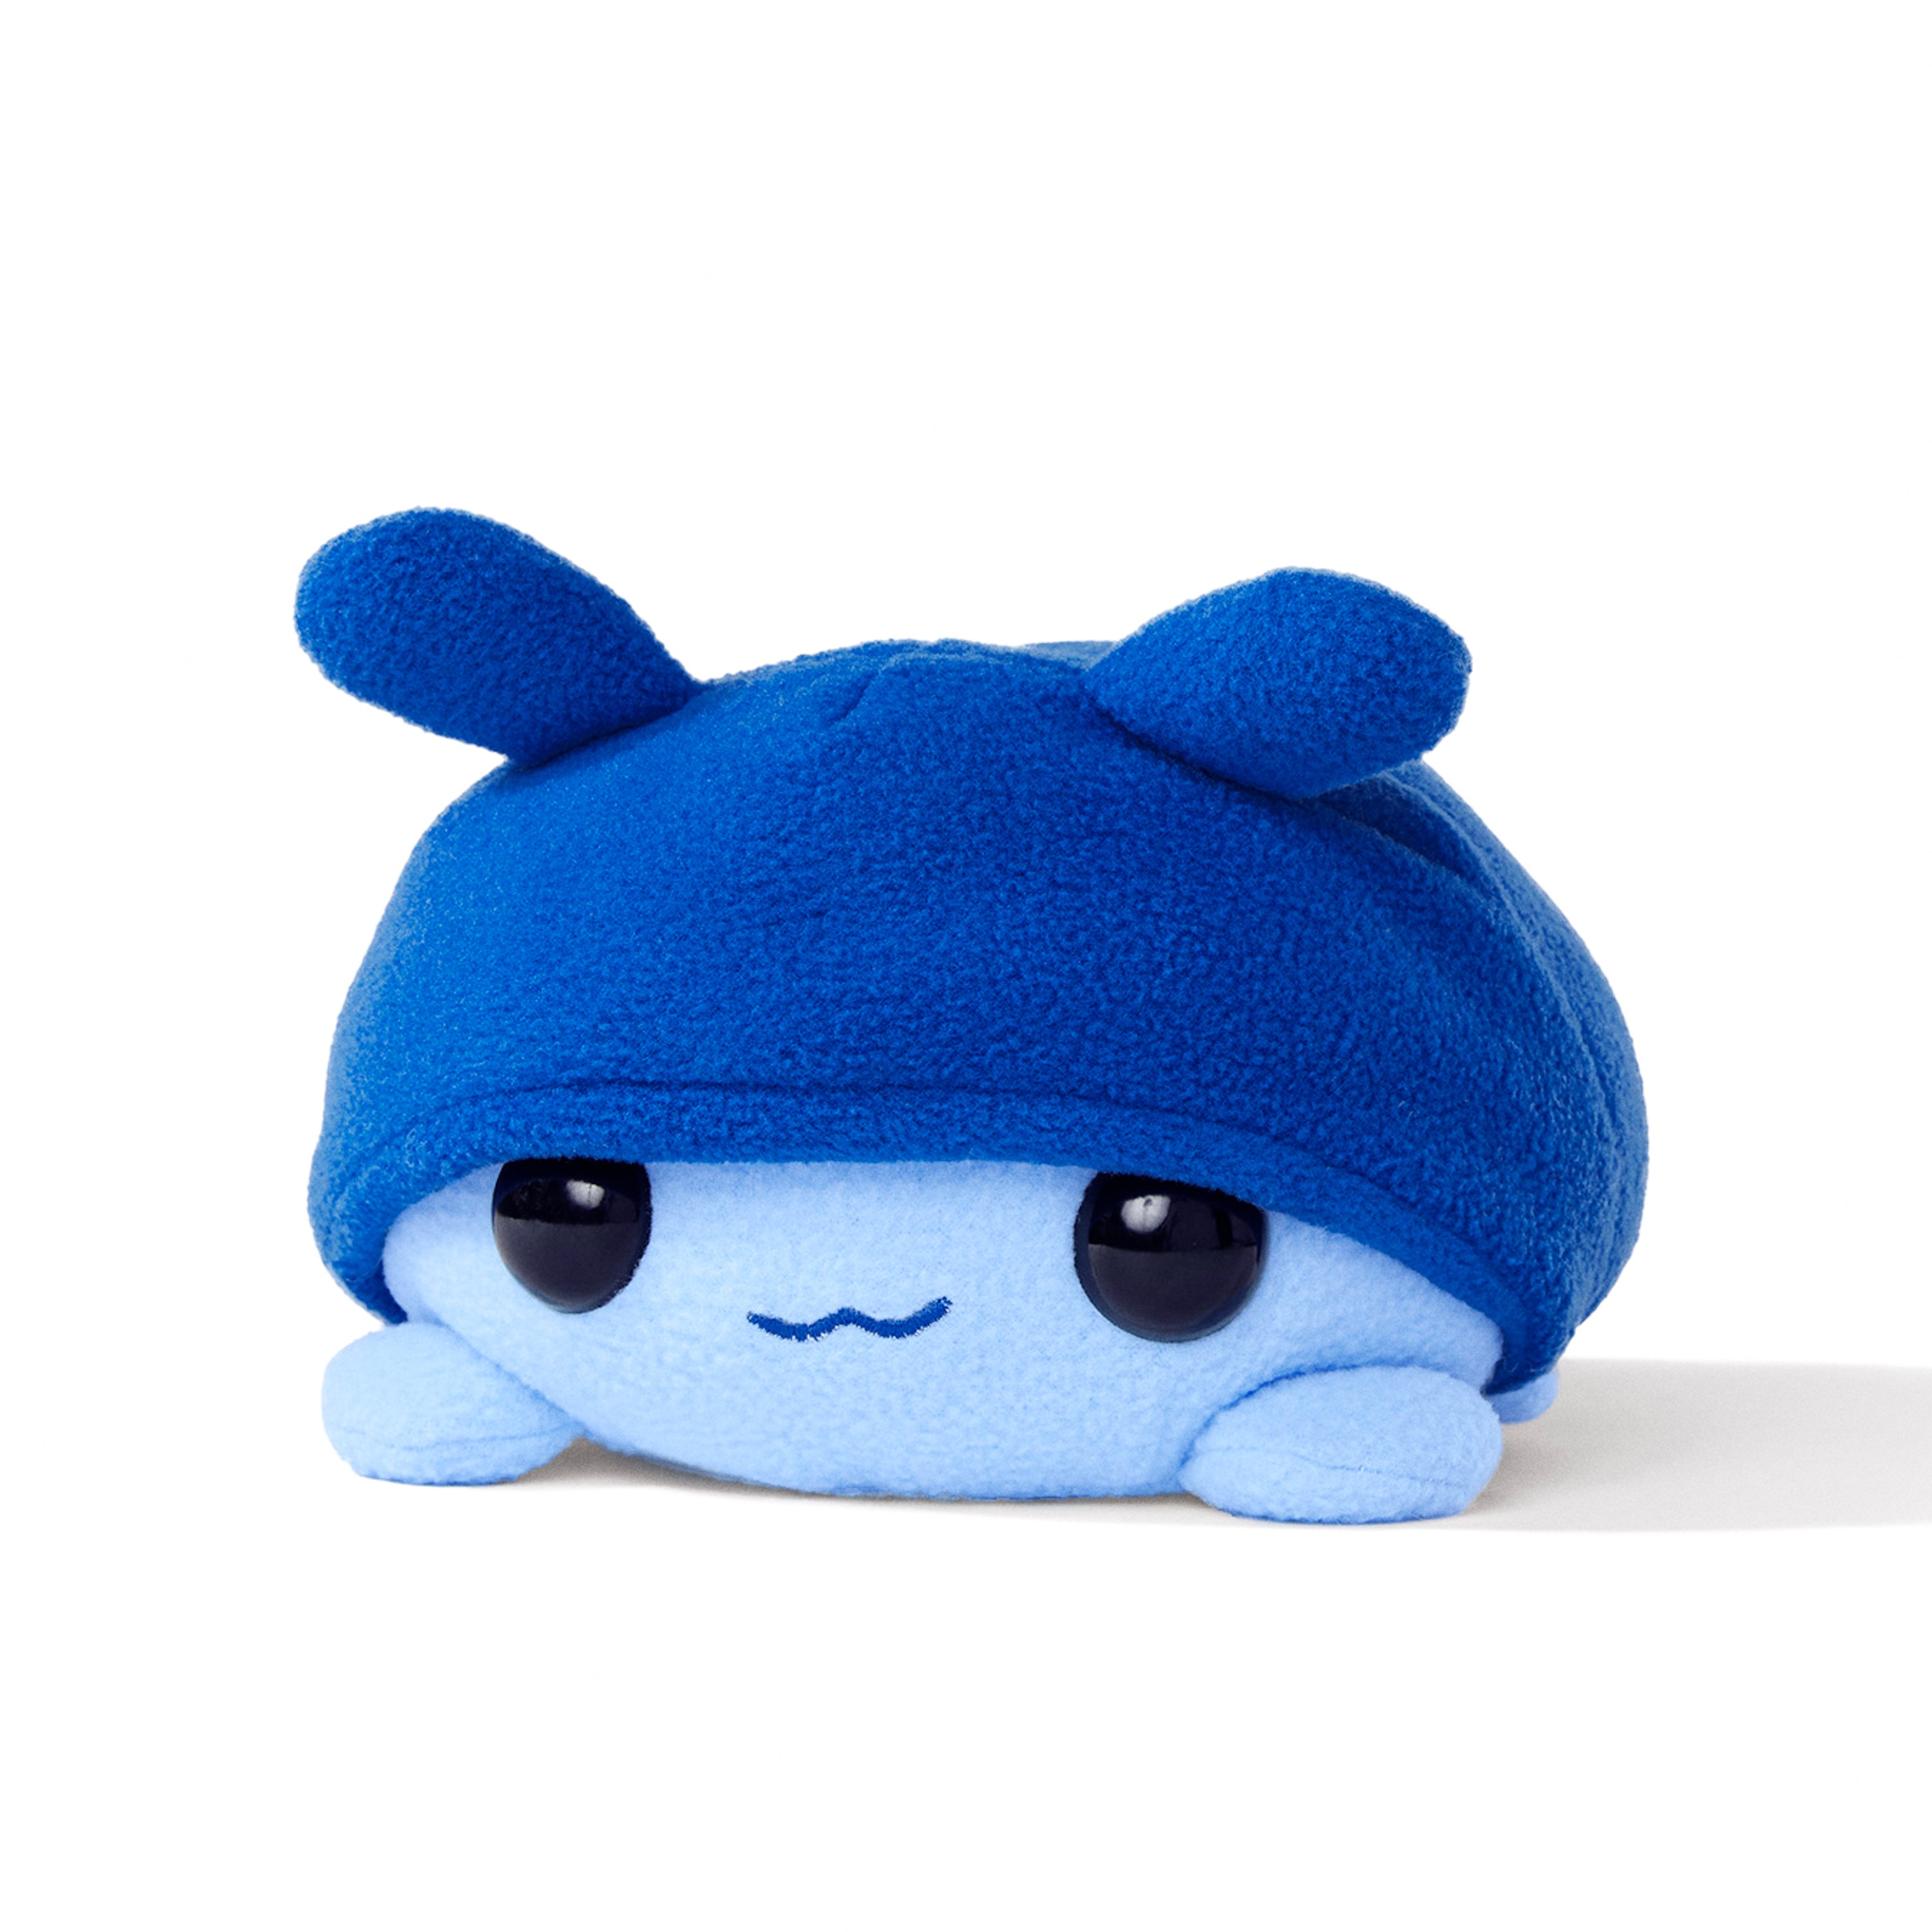 Roly Poly plush